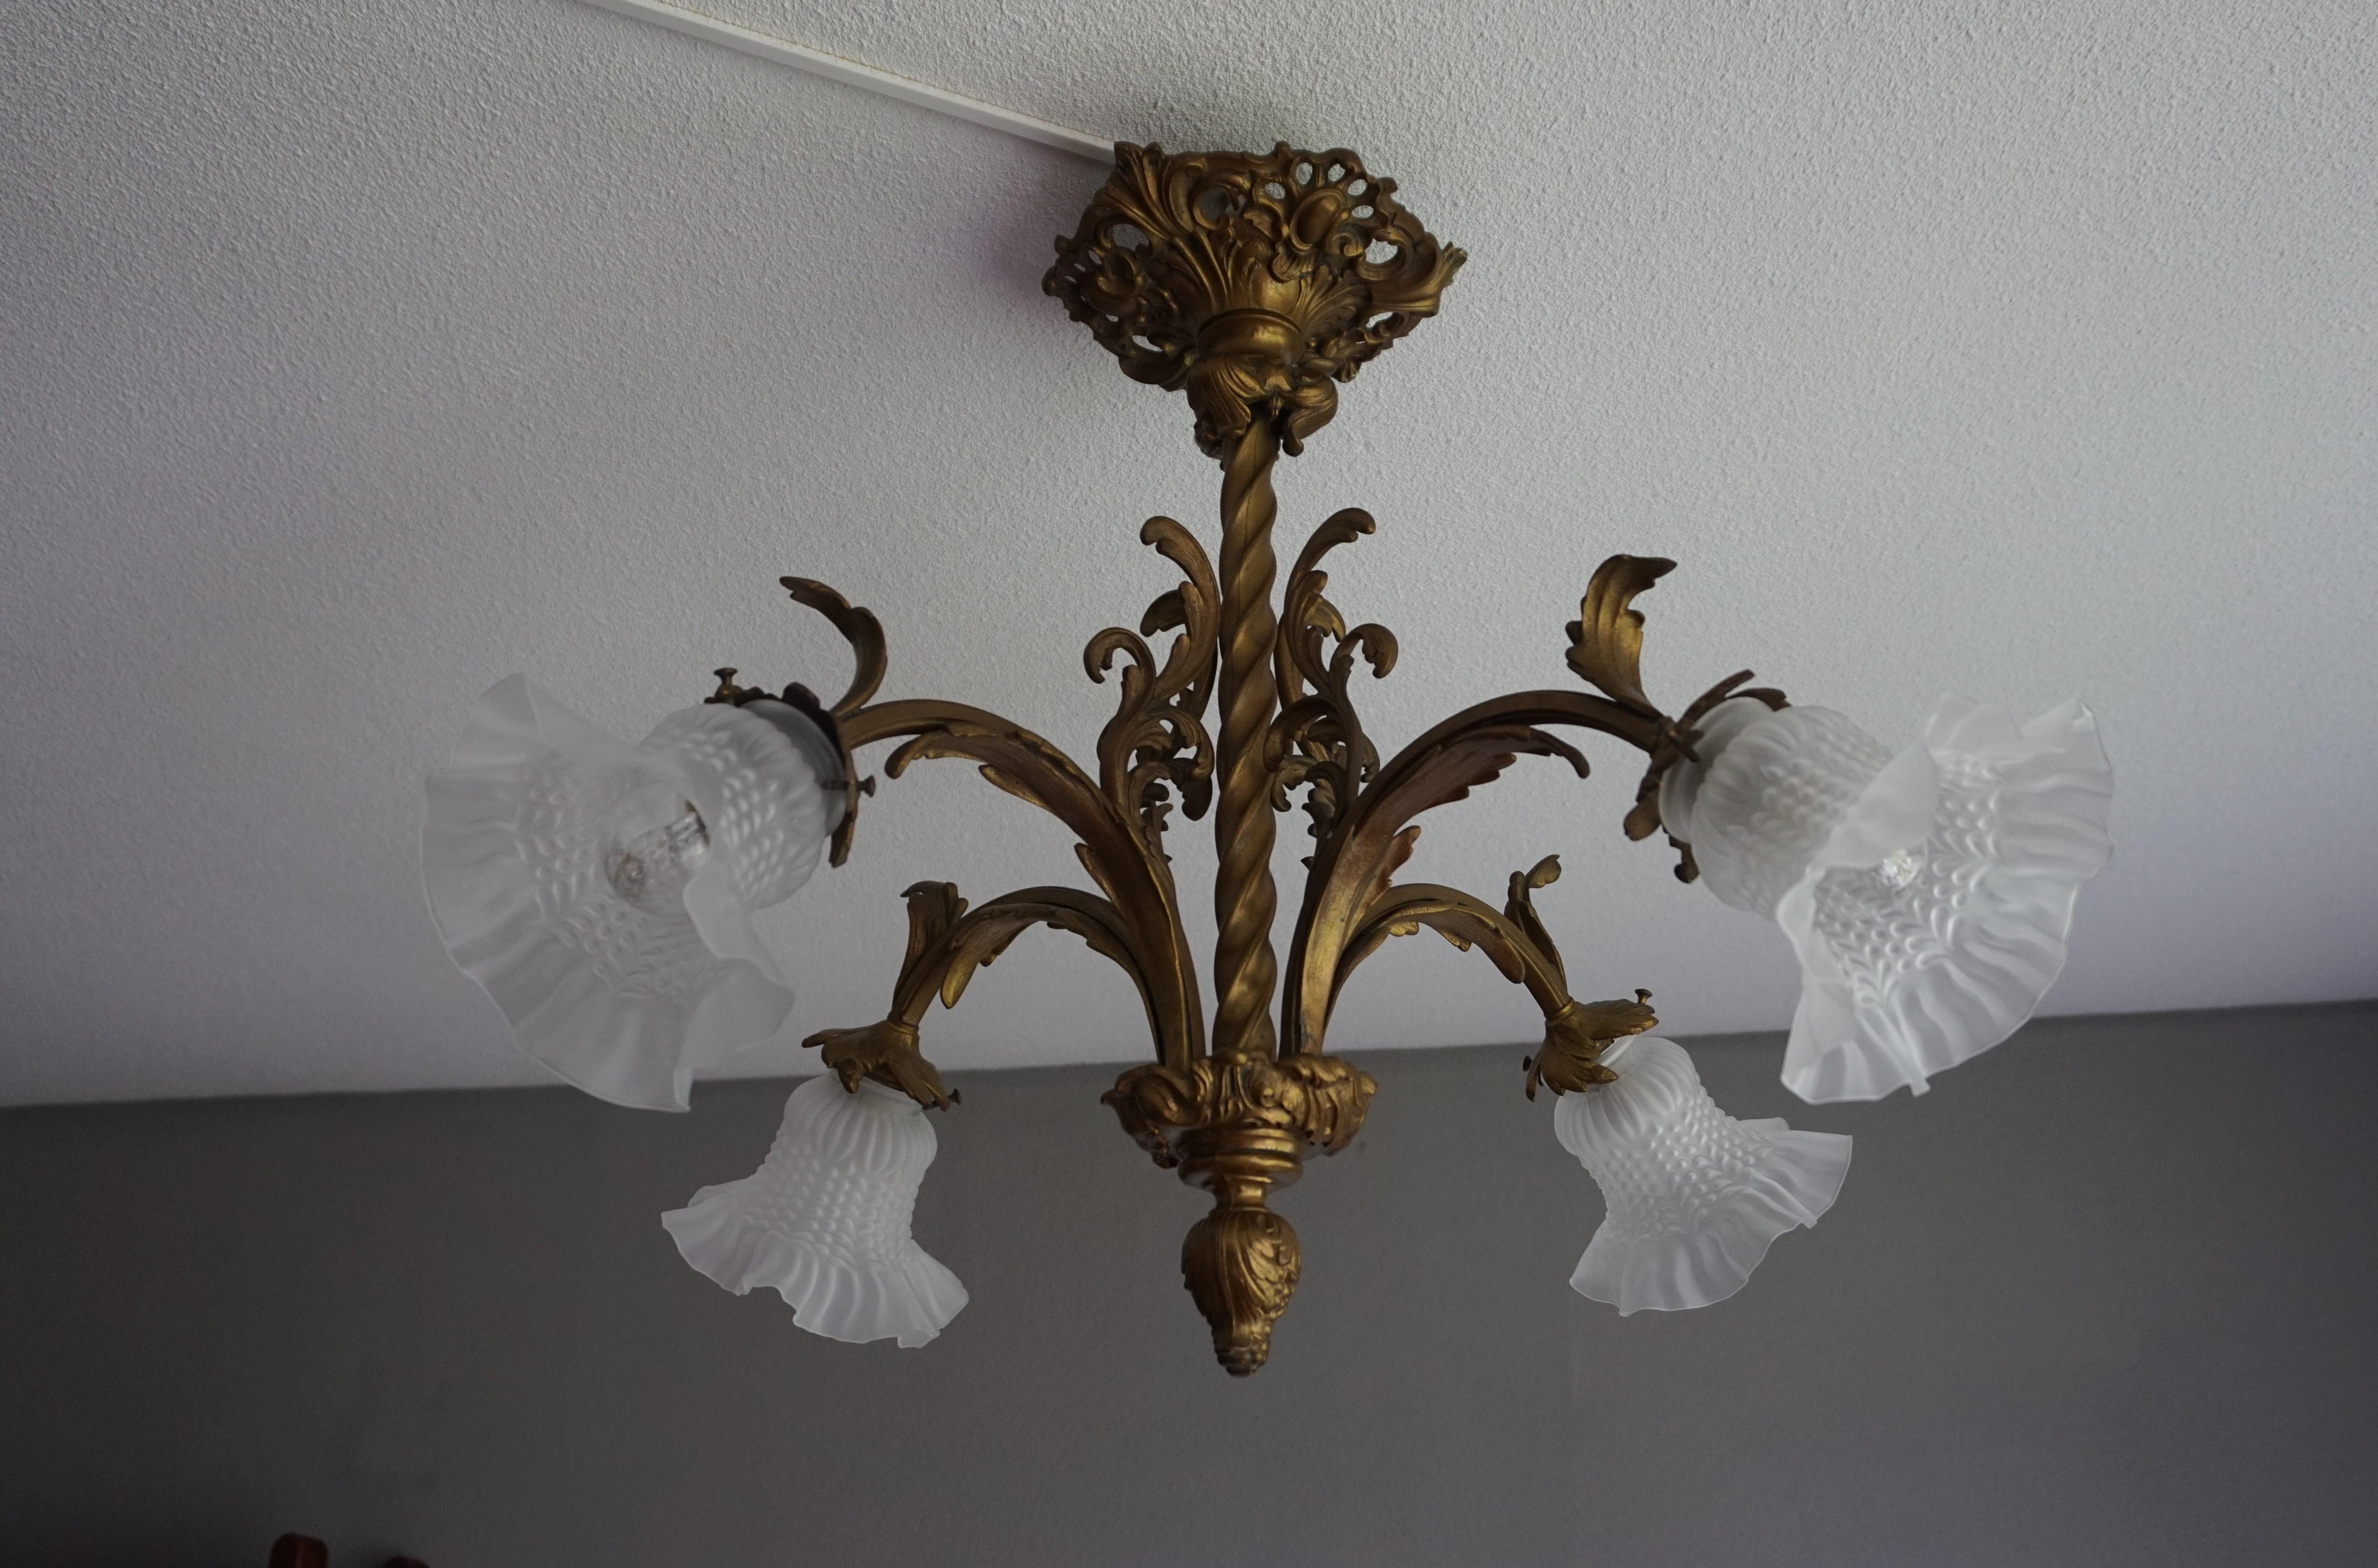 Stylish and beautifully hand-crafted, 4 light chandelier.

If you are looking for a stylish antique light fixture that brings beauty and a good amount of light above your dining table or in any other room then this four light chandelier of wonderful